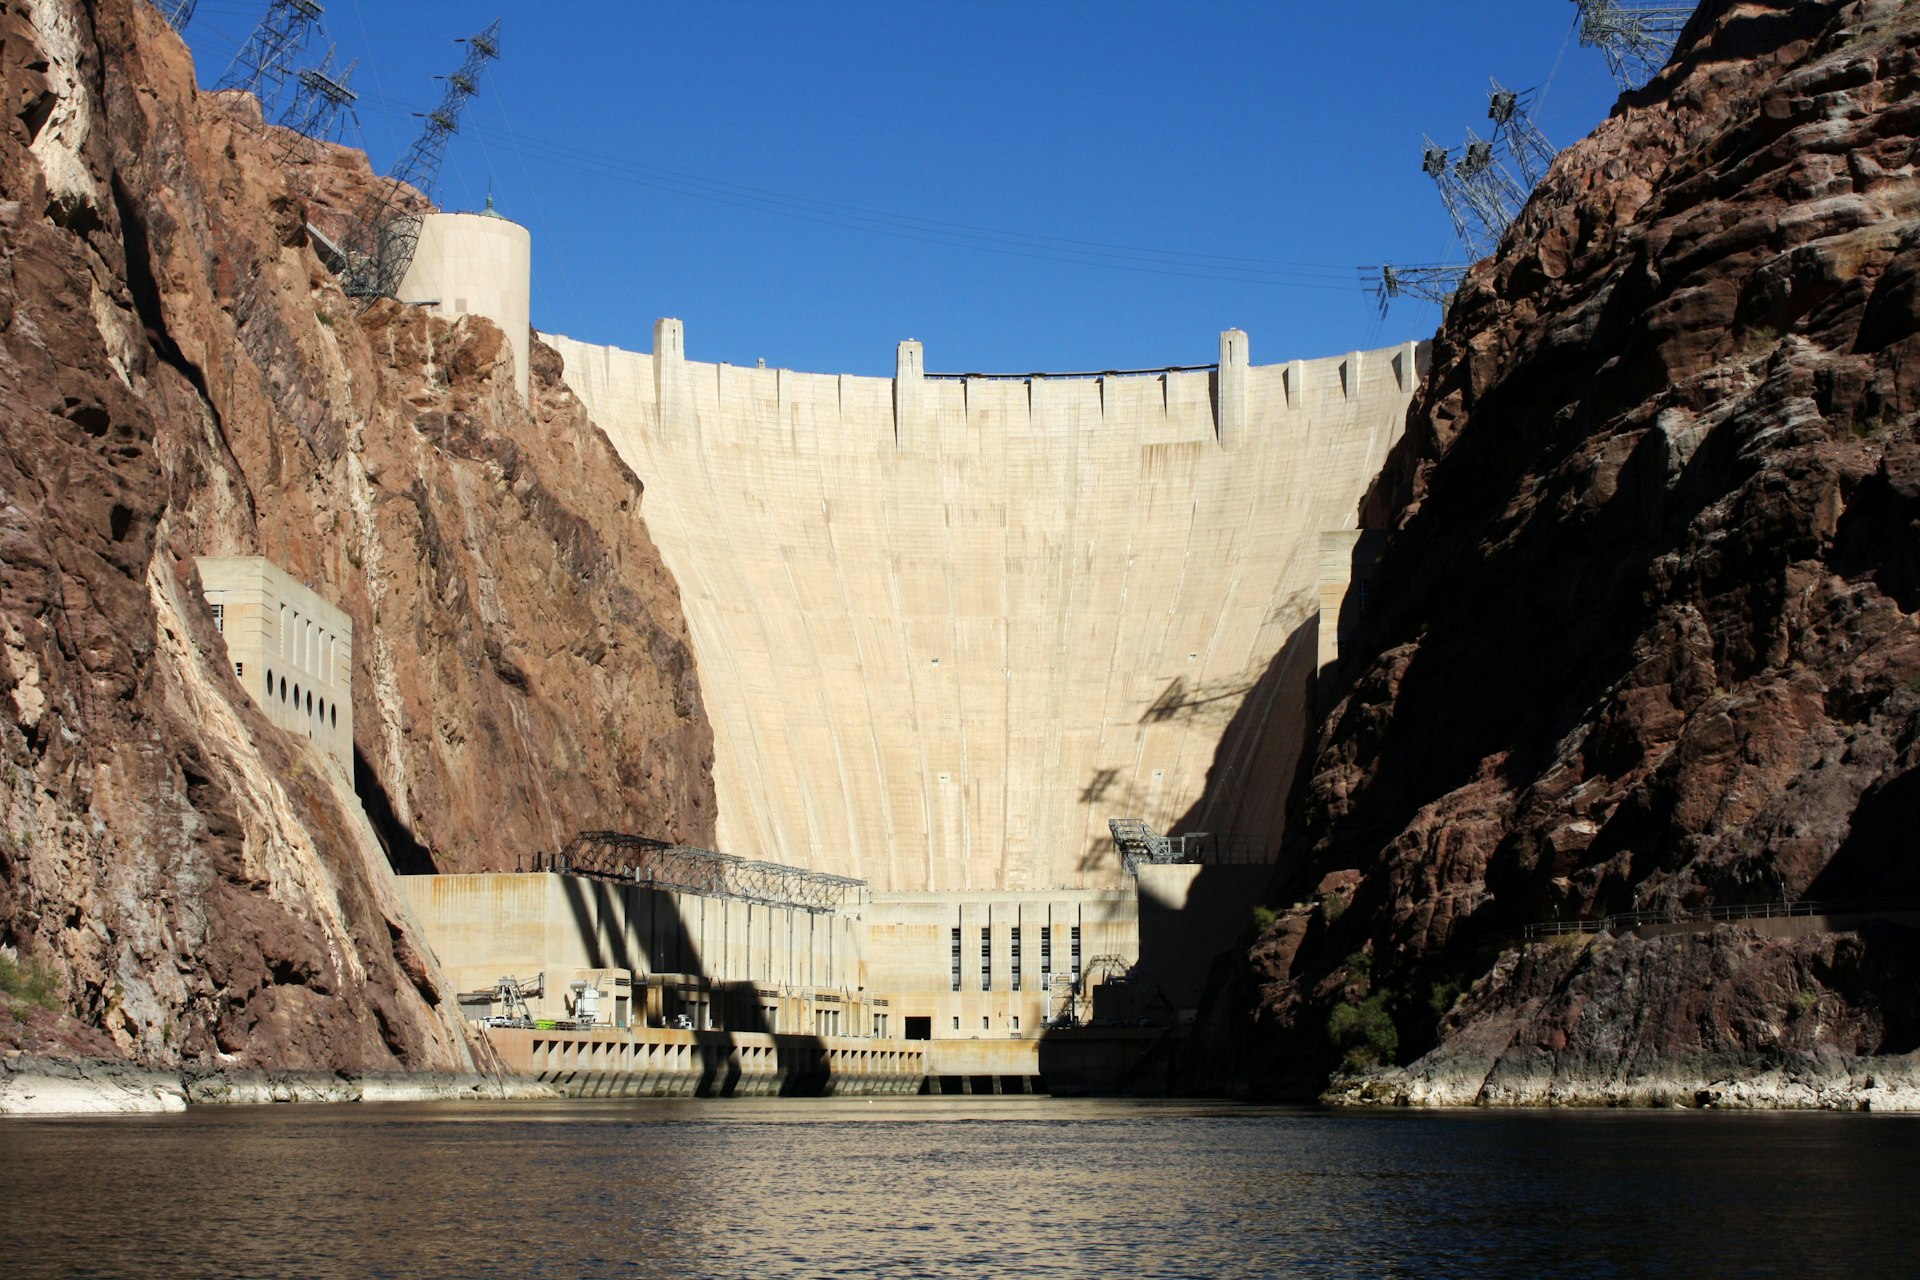 The Hoover Dam from downriver. Image by Alexander Howard / Lonely Planet